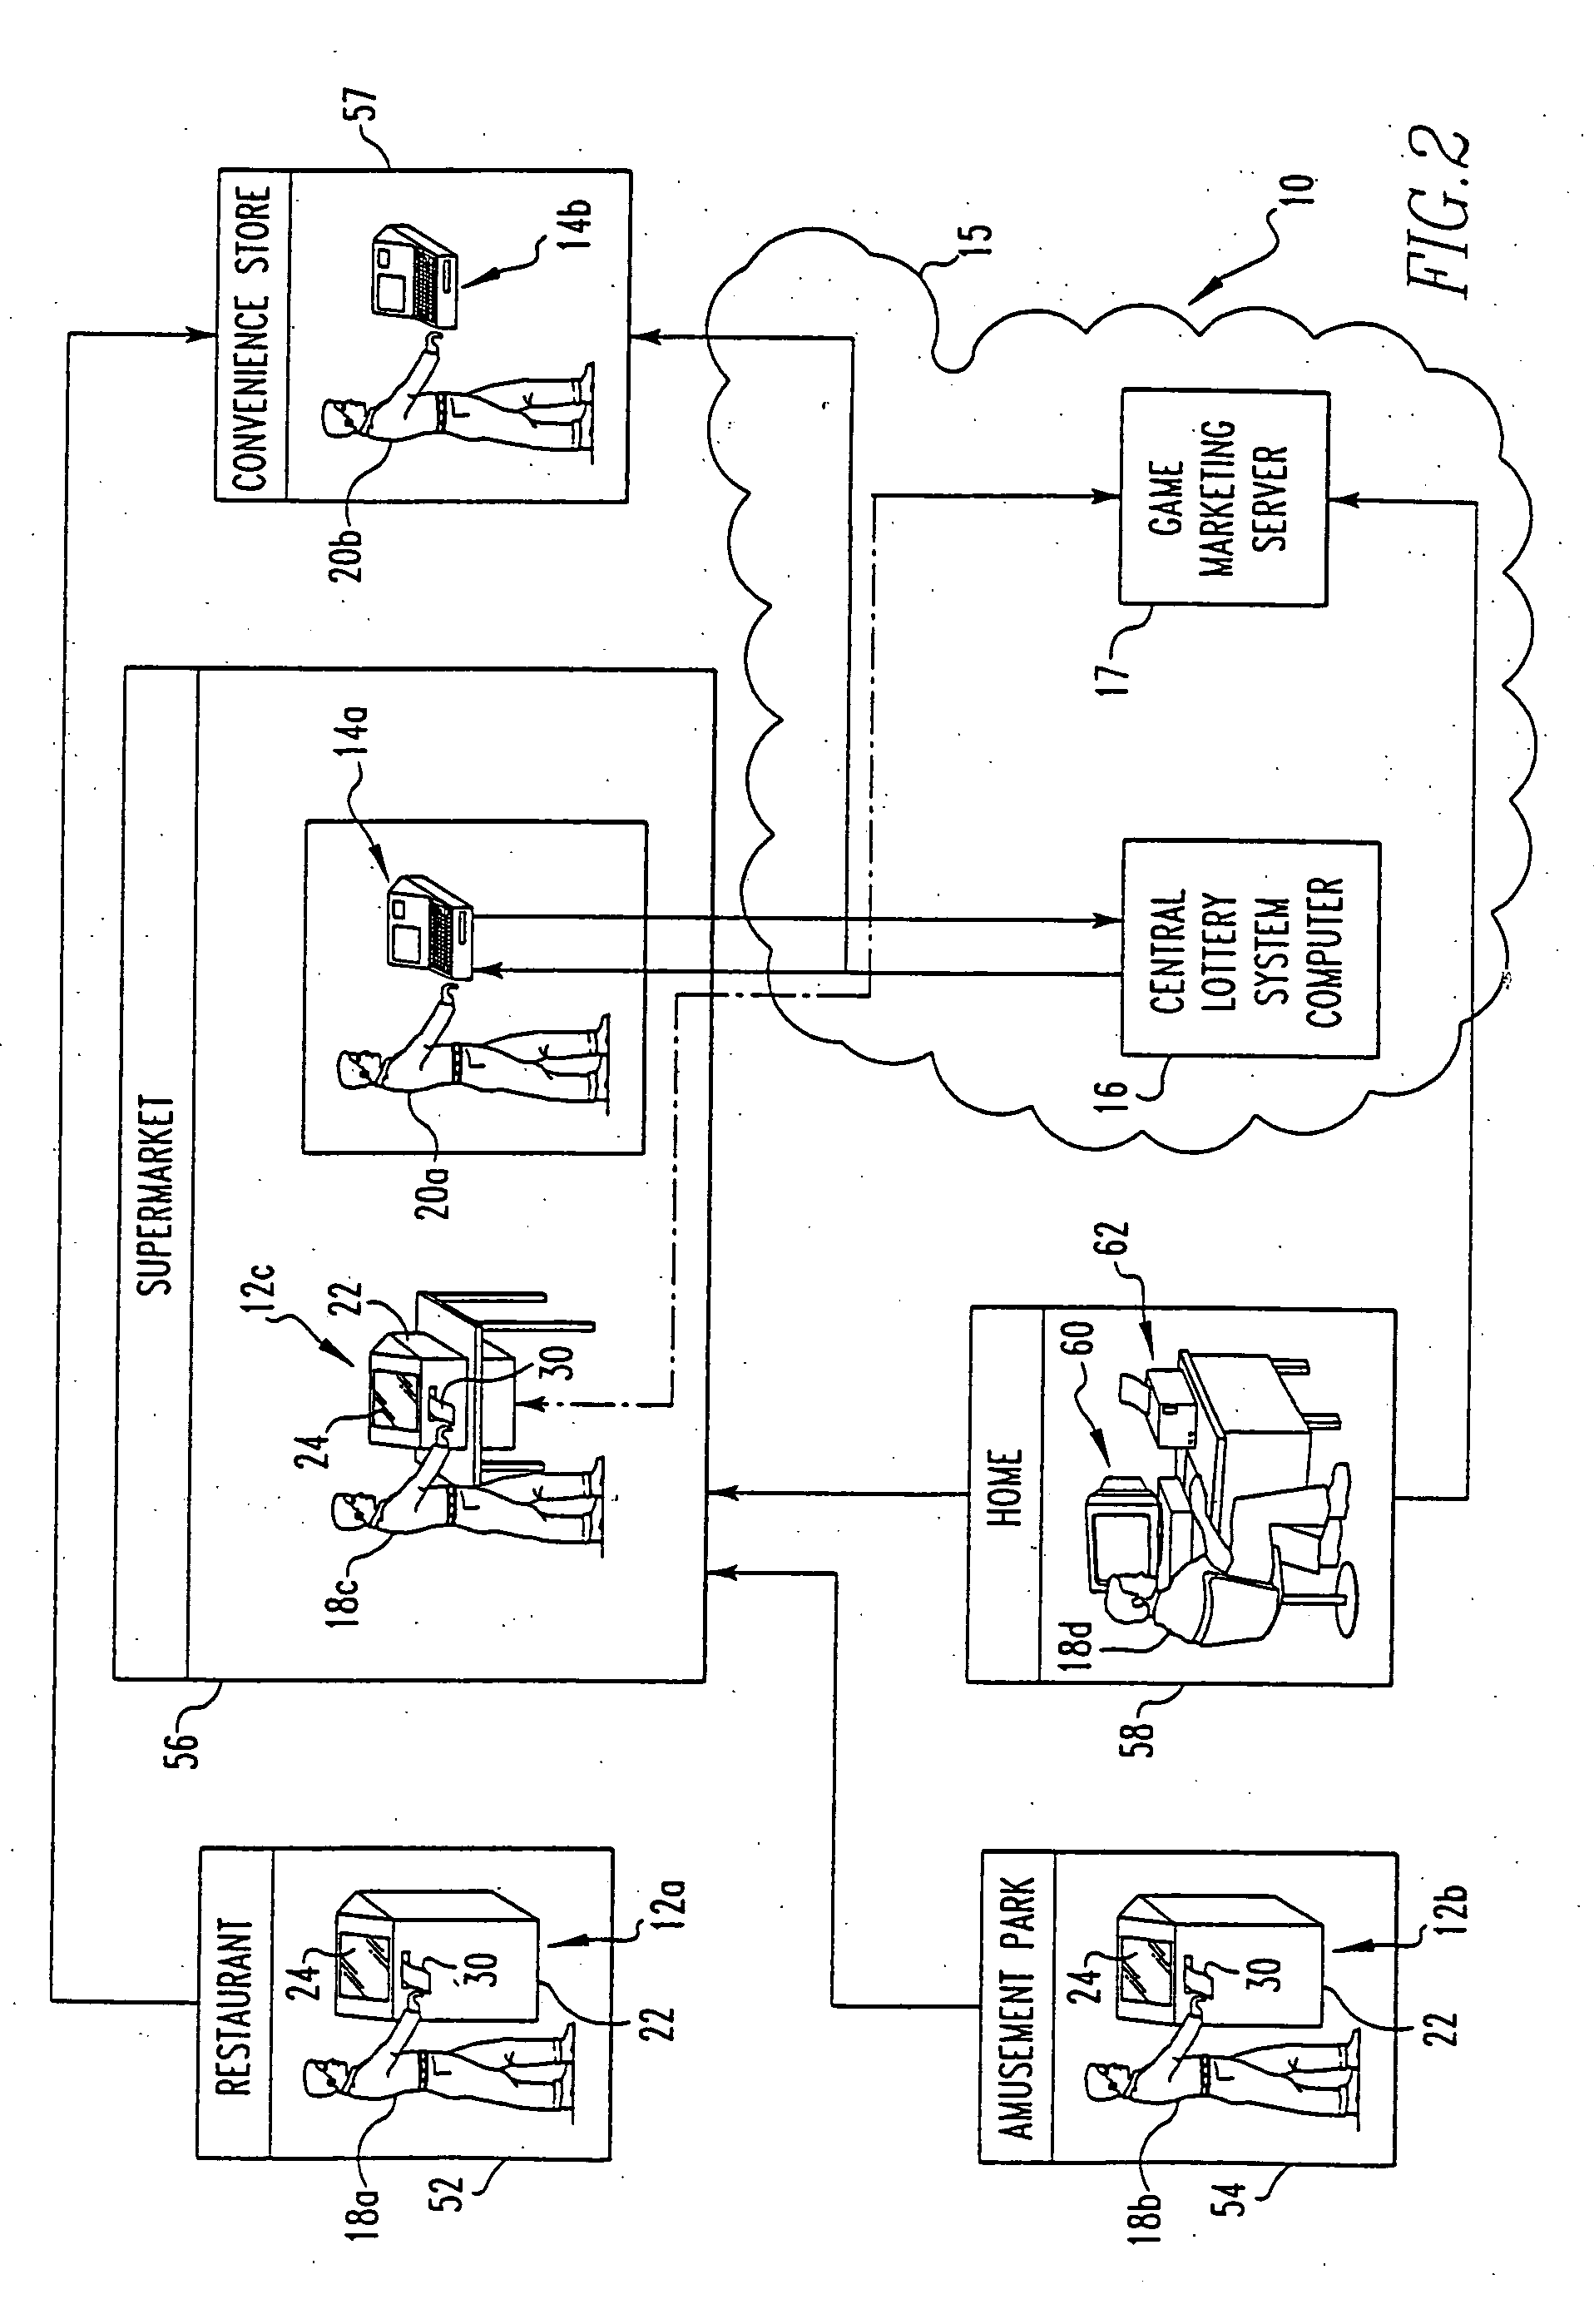 Method and system for marketing and game selection for lottery products